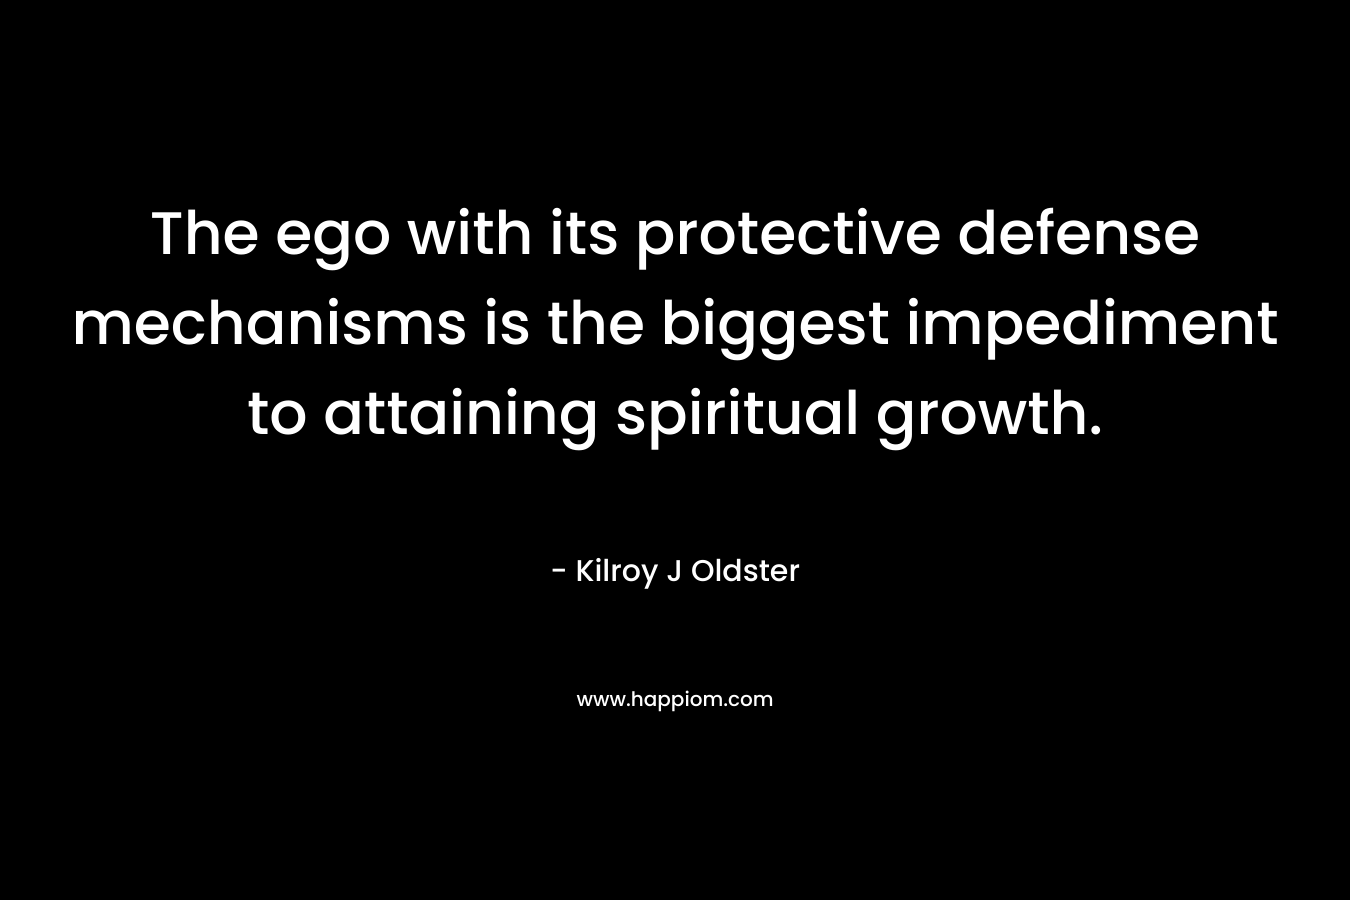 The ego with its protective defense mechanisms is the biggest impediment to attaining spiritual growth. – Kilroy J Oldster